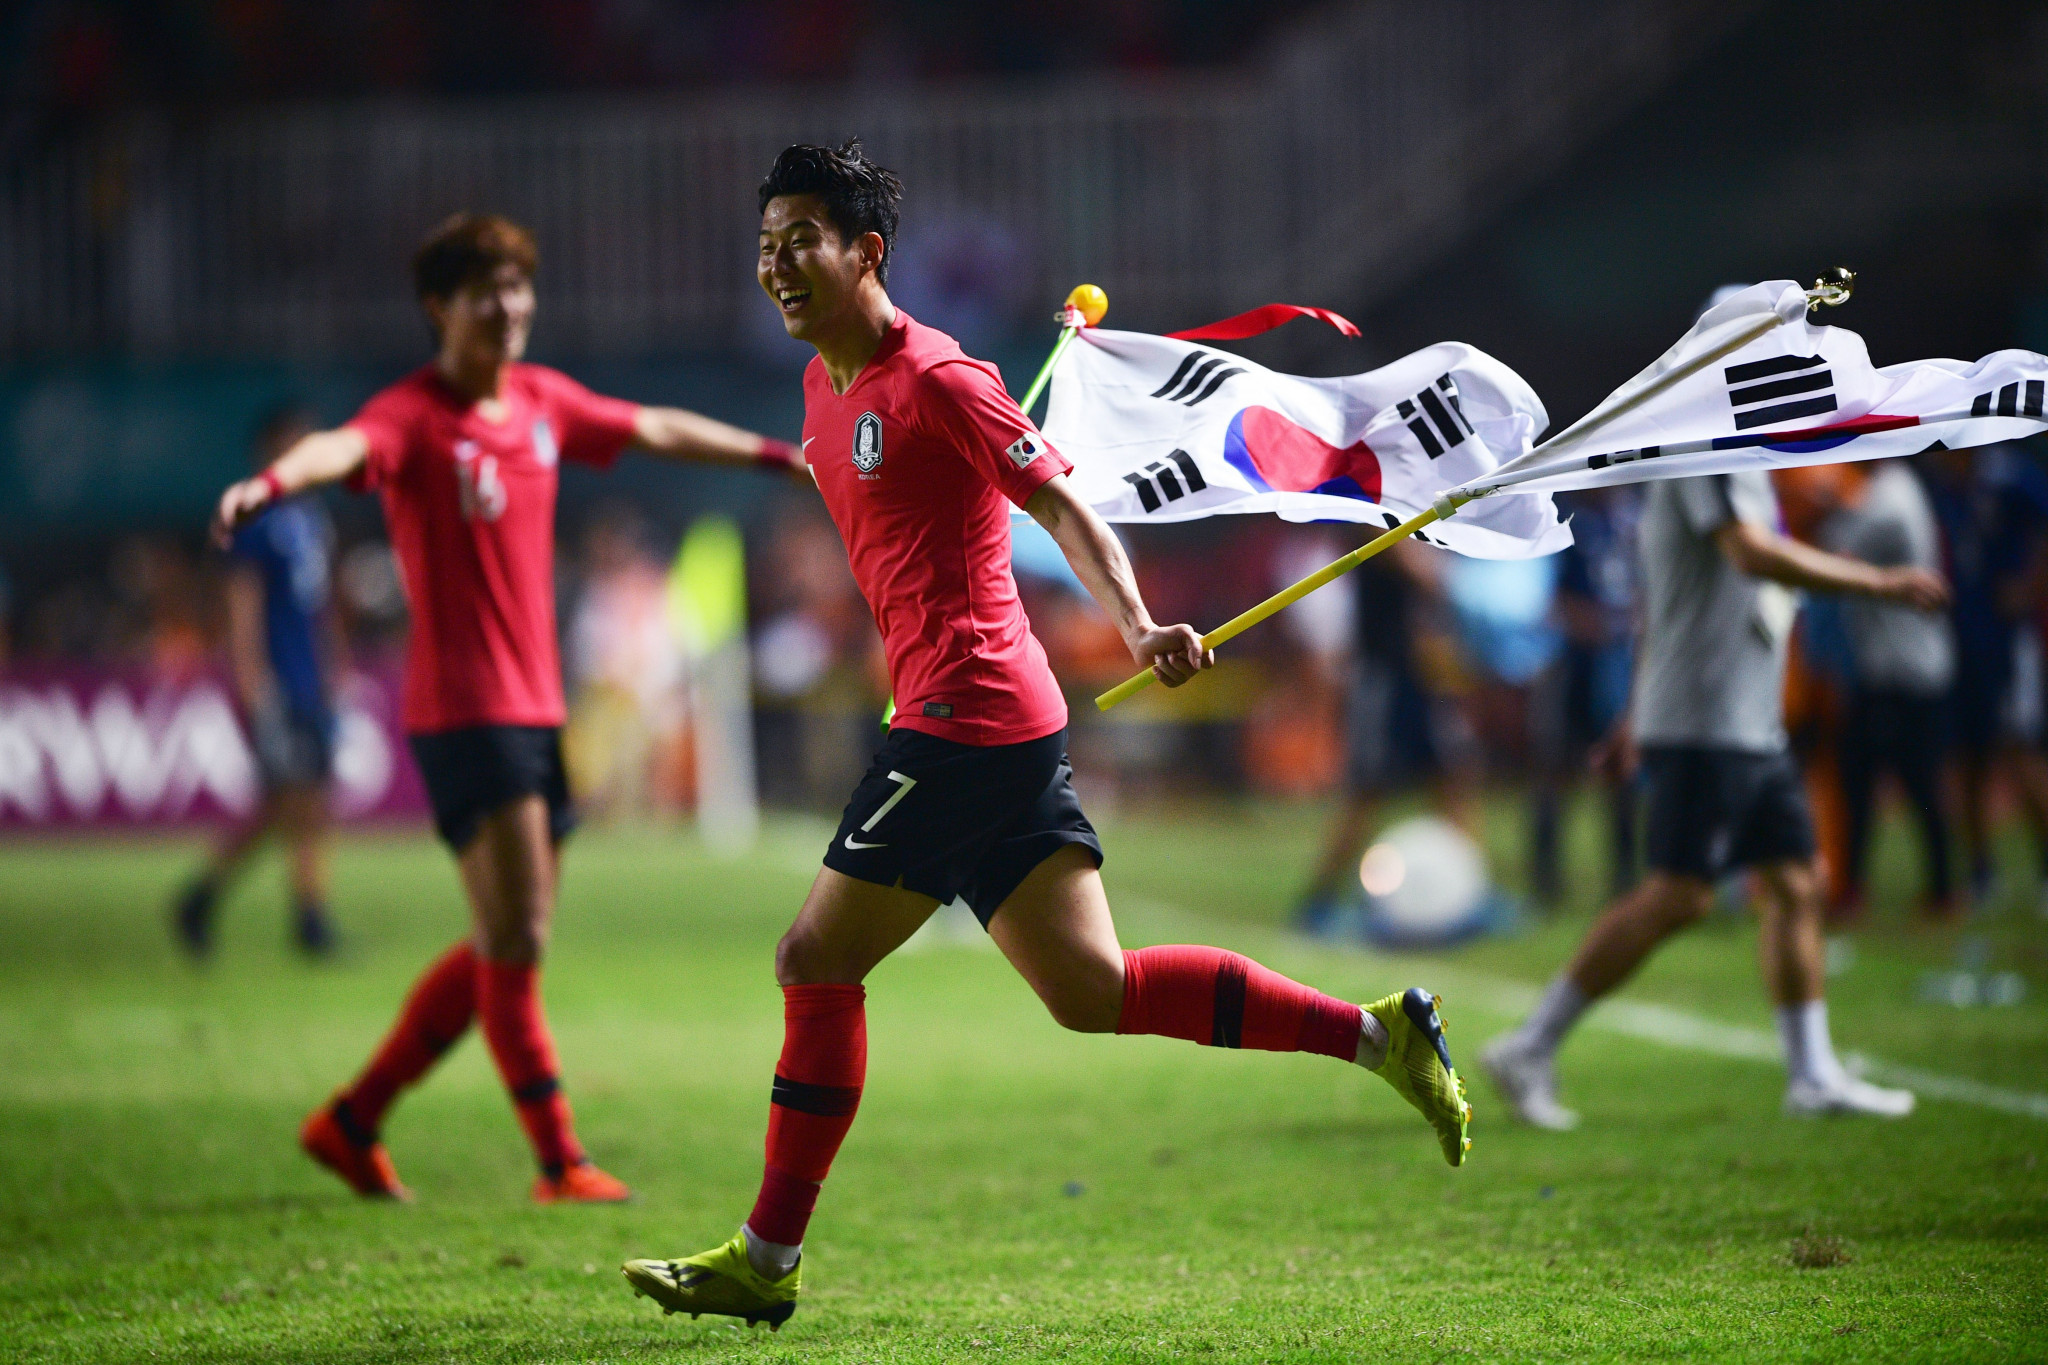 Tottenham Hotspur striker Son Heung-min was part of South Korea's squad that won the gold medal at the 2018 Asian Games in Jakarta-Palembang ©Getty Images